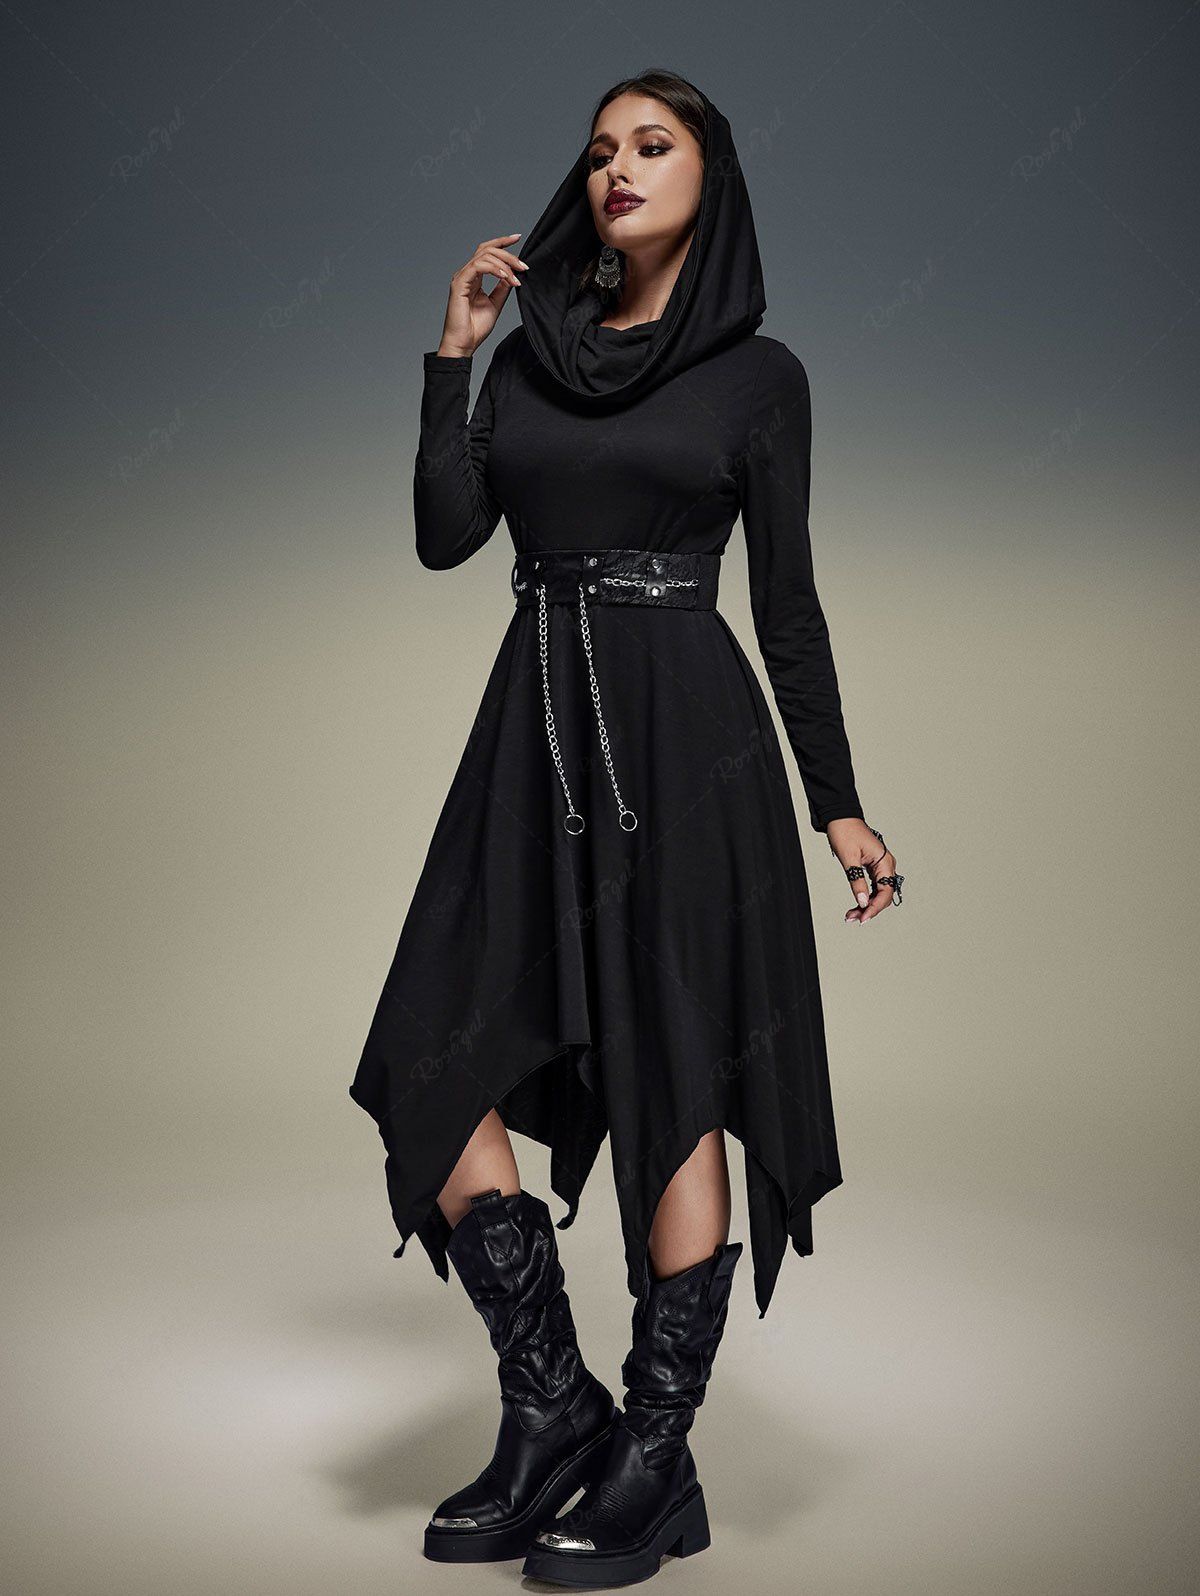 💗Danae_lovecraft Loves💗 Gothic Floral Lace Chain Belt Asymmetric Ruched Hooded Dress